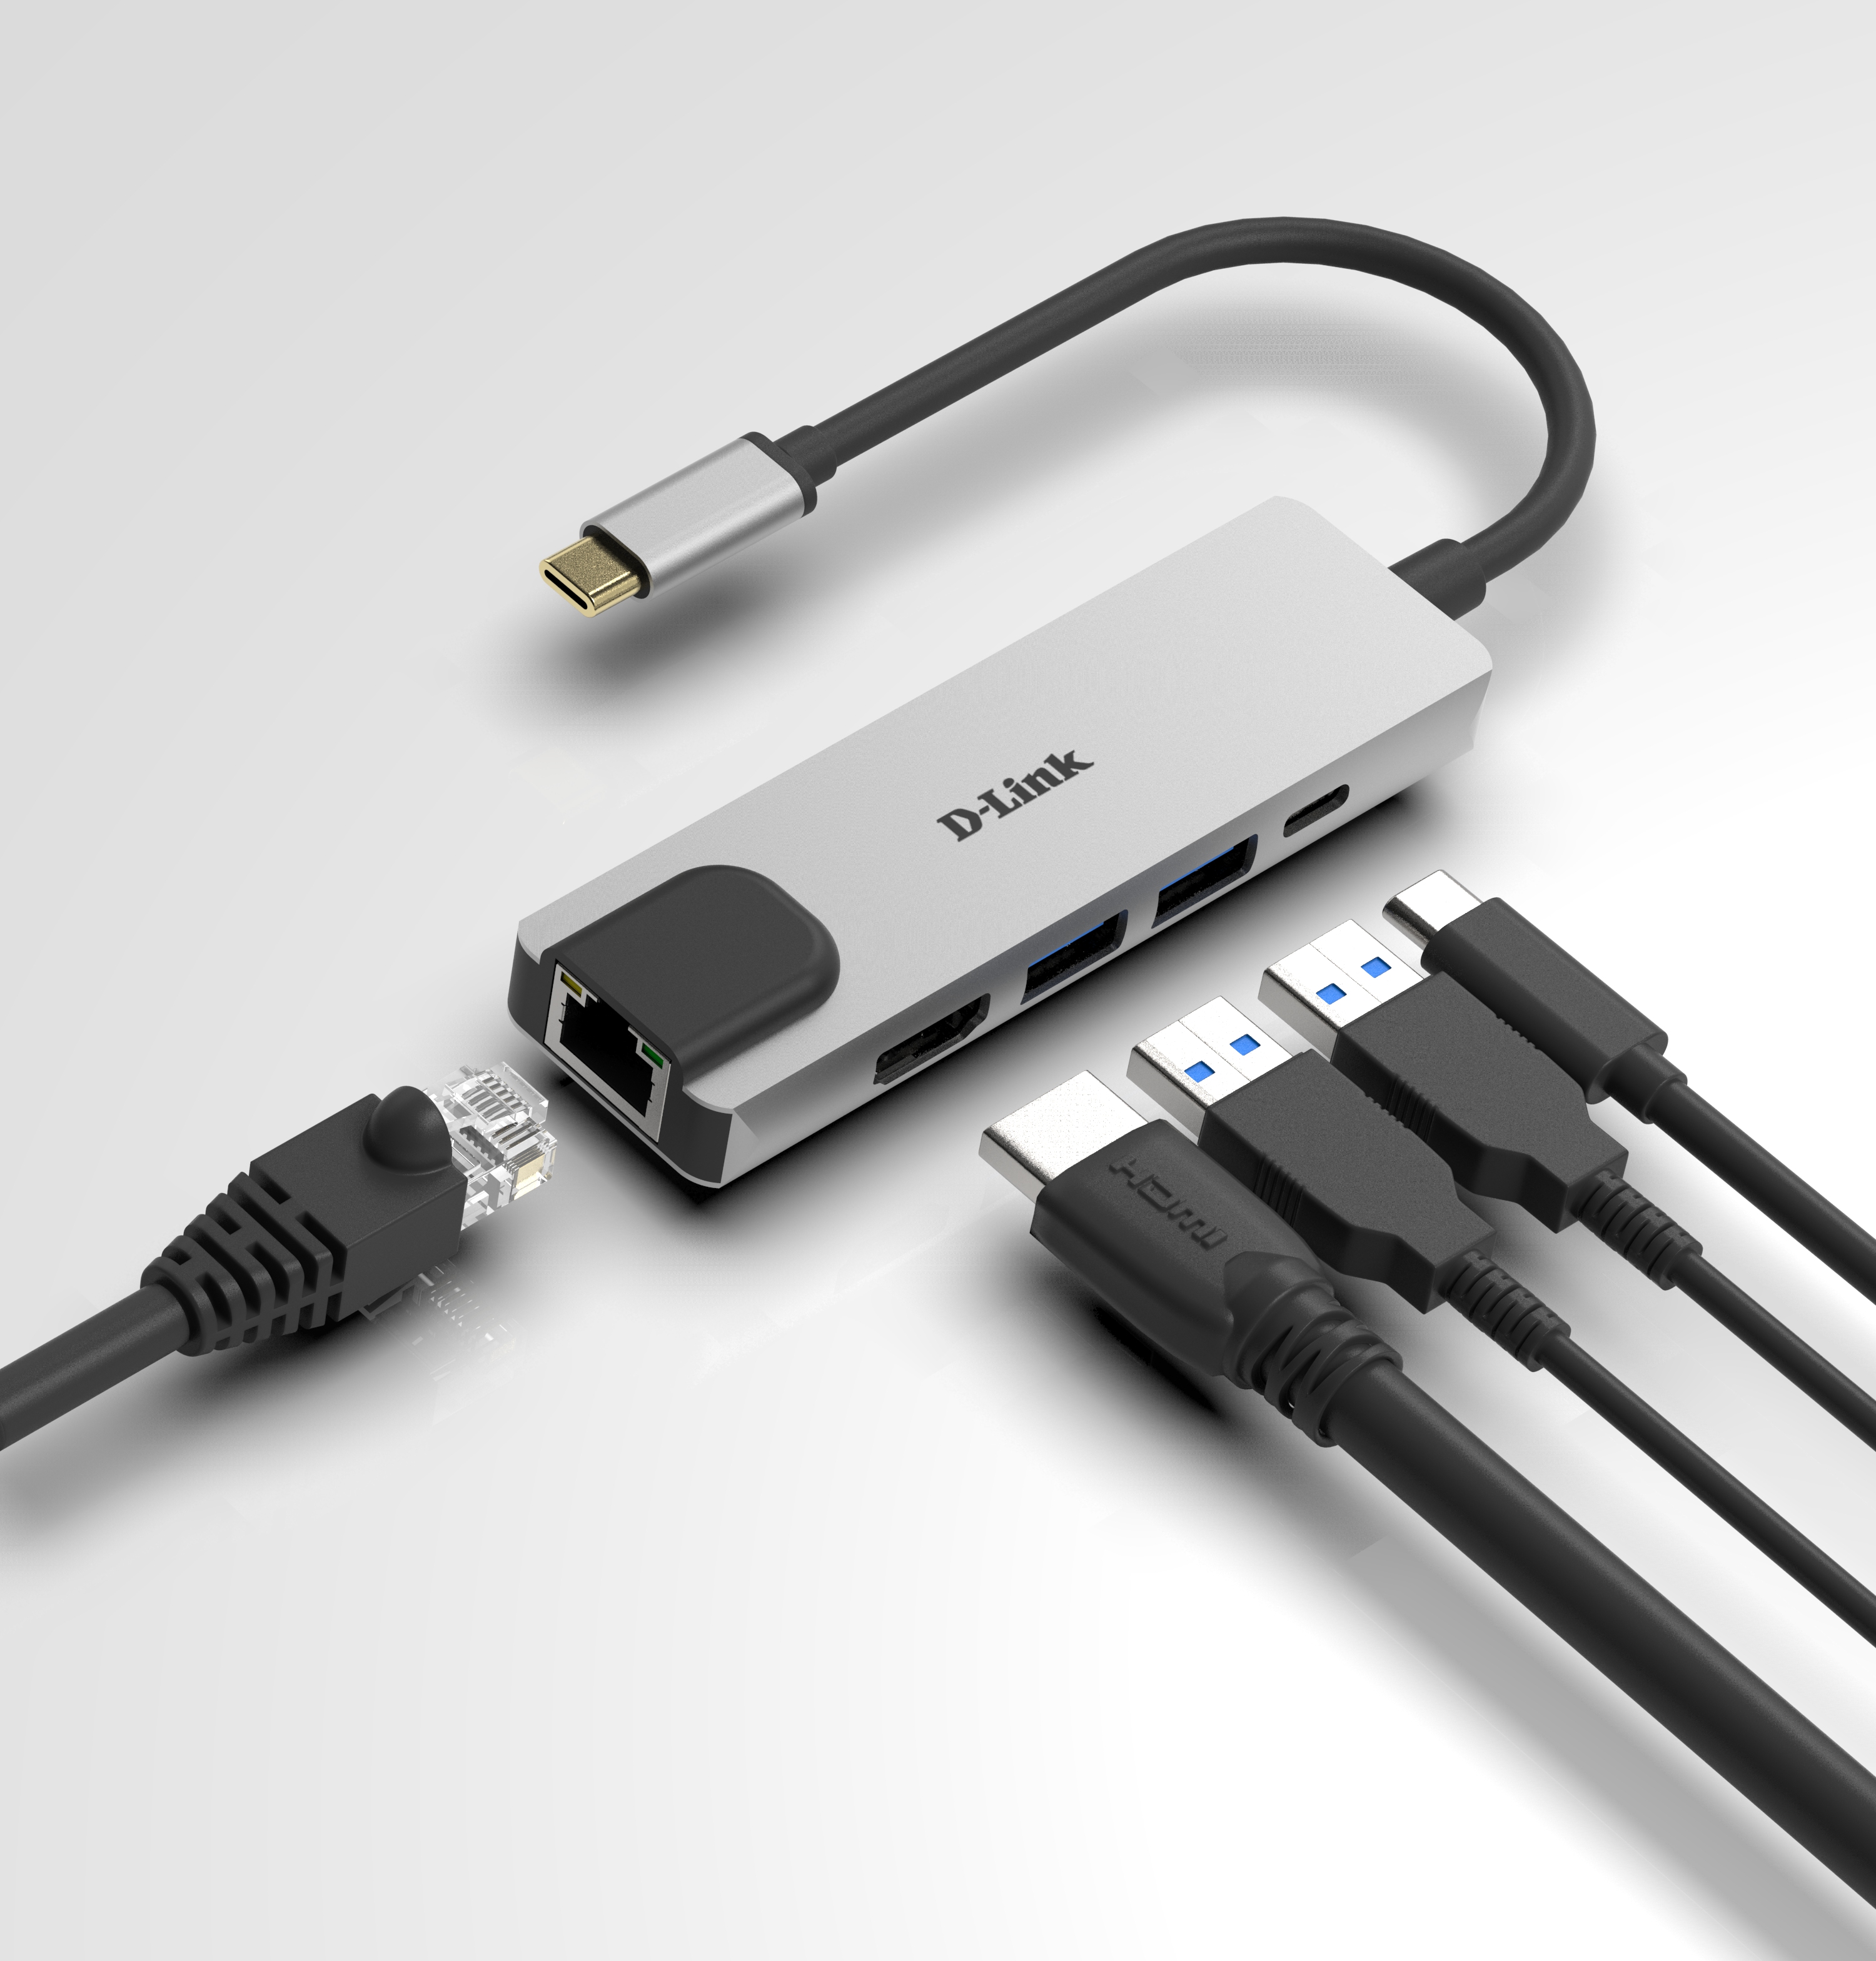 DUB-M520 5-in-1 USB-C Hub with HDMI/Ethernet and Power Delivery - showing example connections